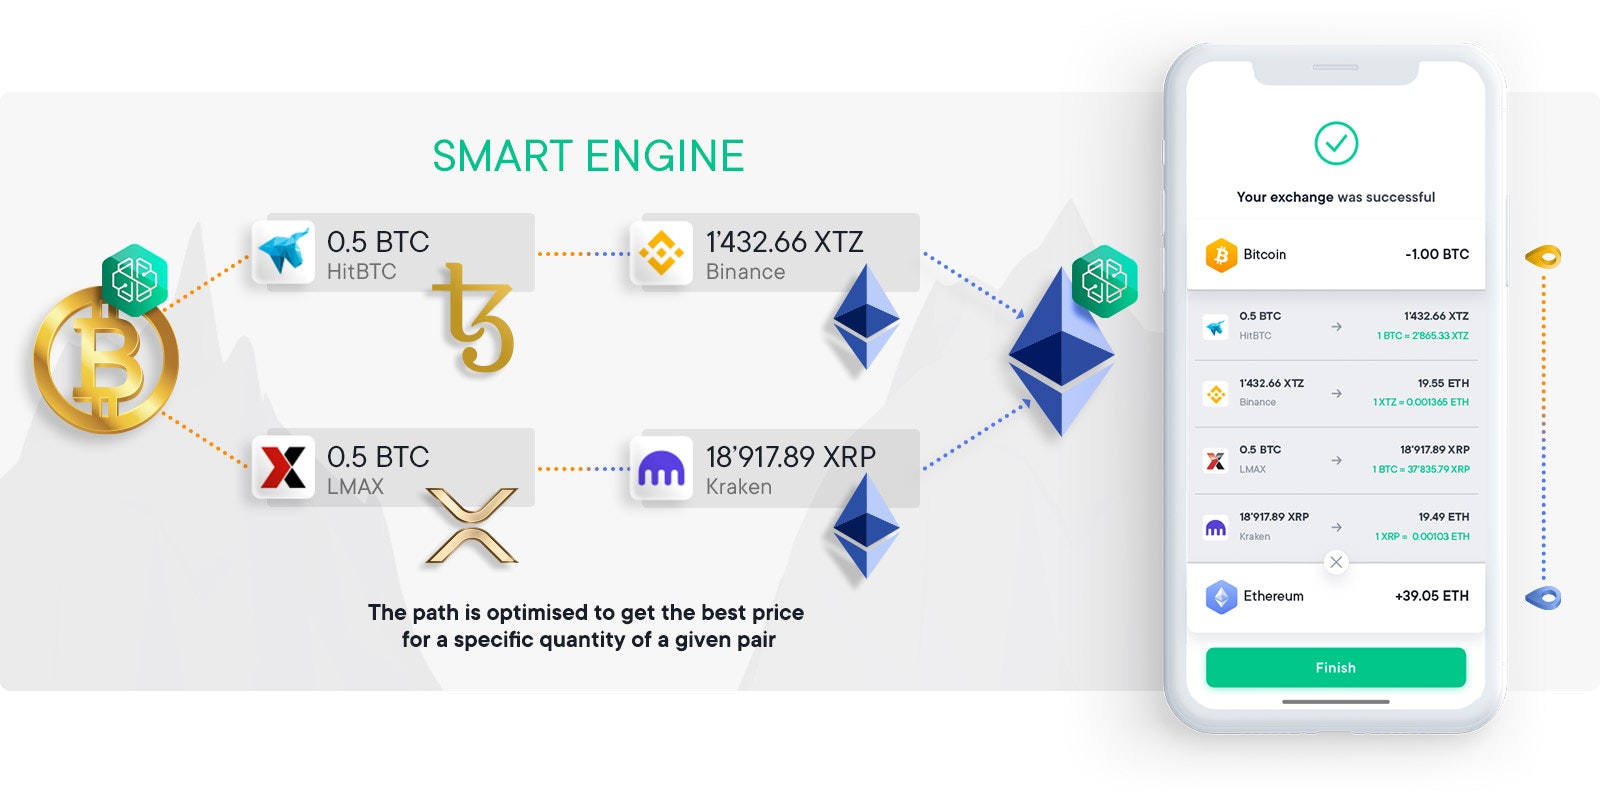 The Smart Exchange Report shows you the route we take to get you the best deal